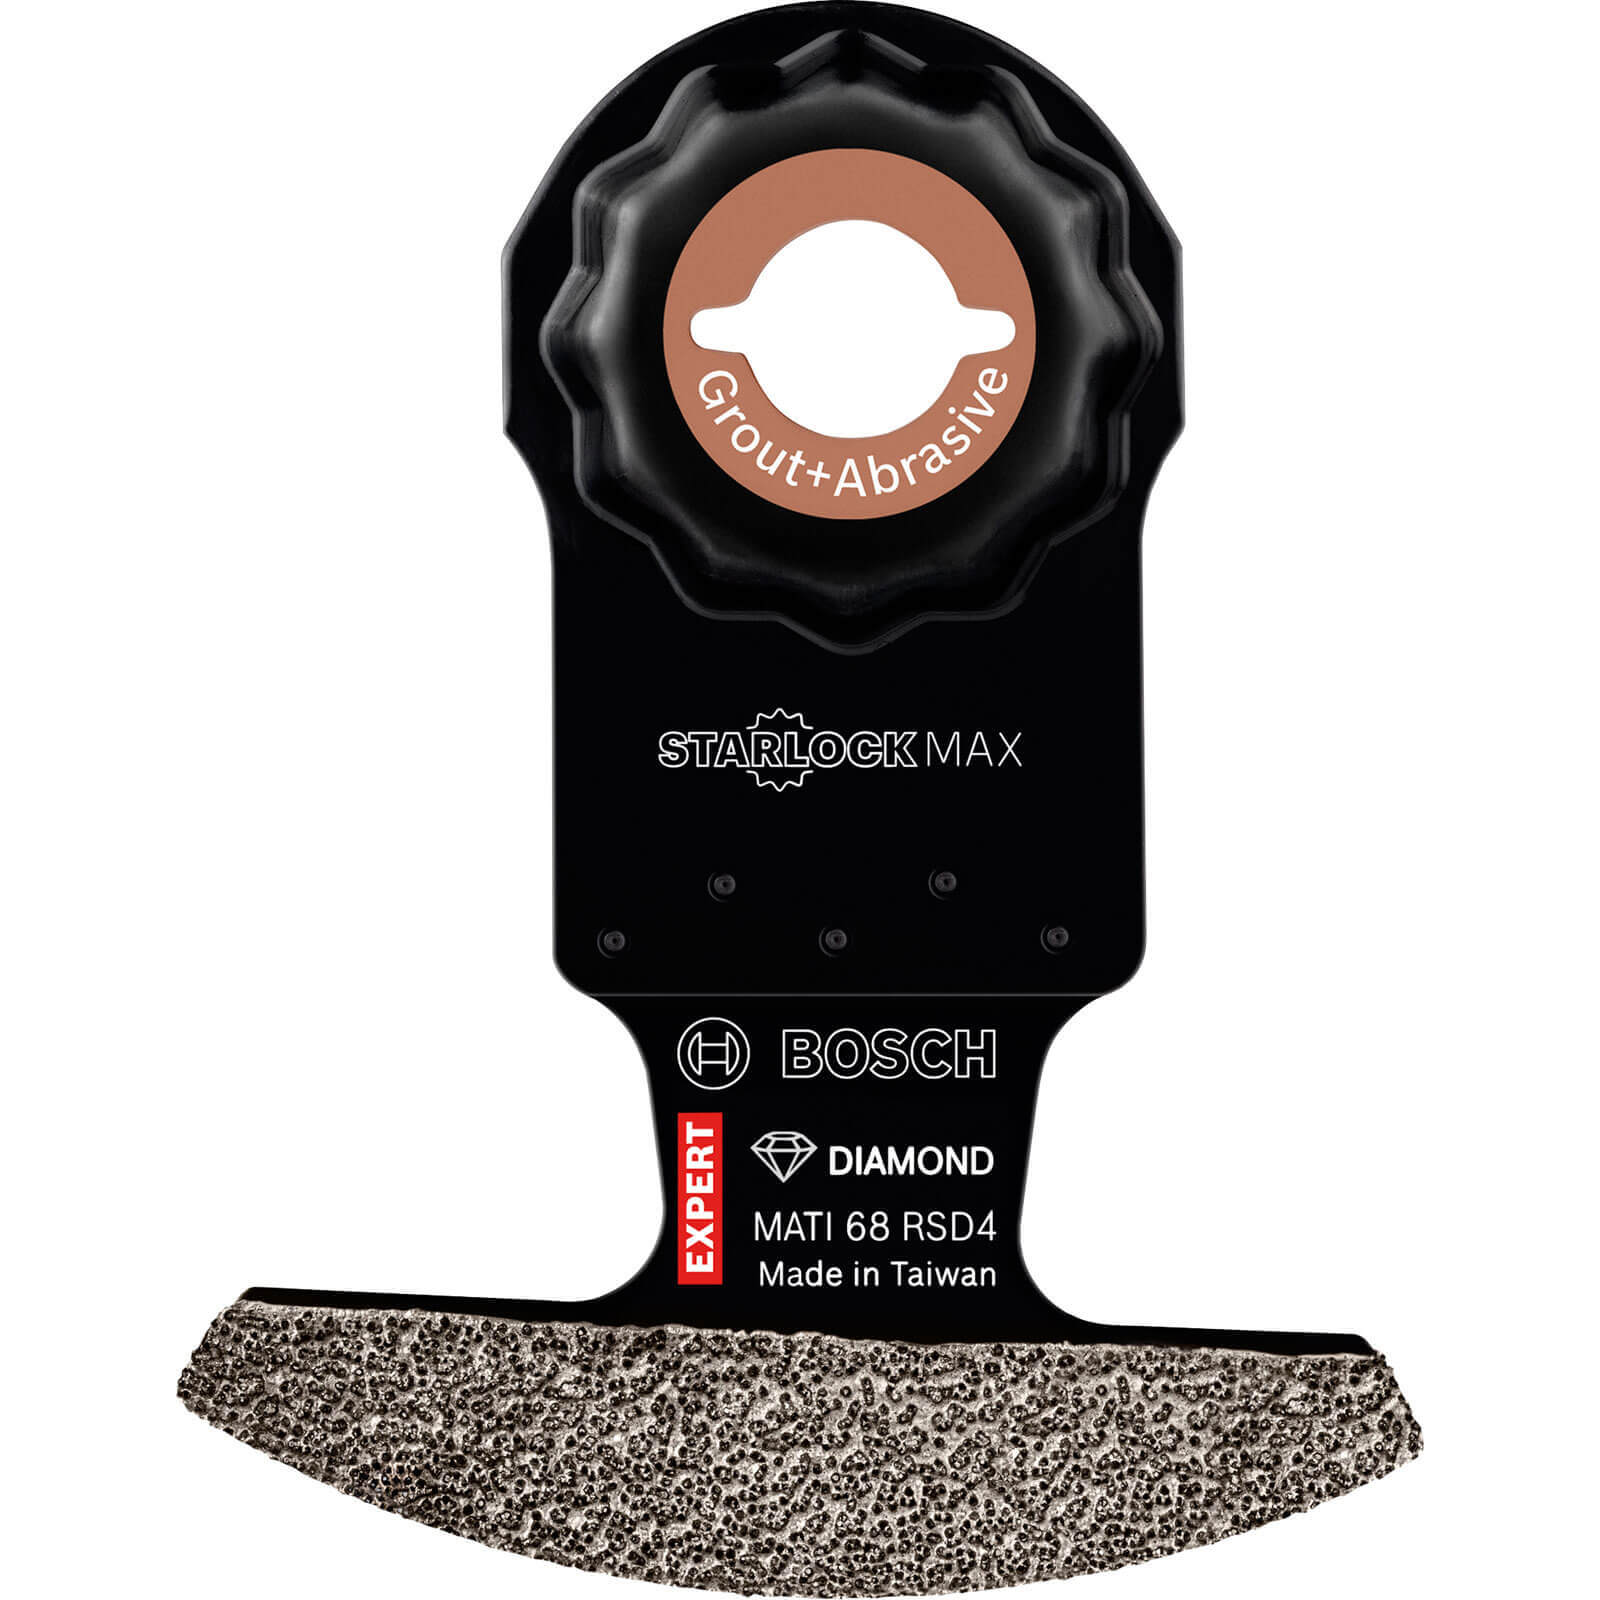 Bosch Expert MATI 68 RSD4 Abrasive and Grout Starlock Max Oscillating Multi Tool Segment Saw Blade 68mm Pack of 1